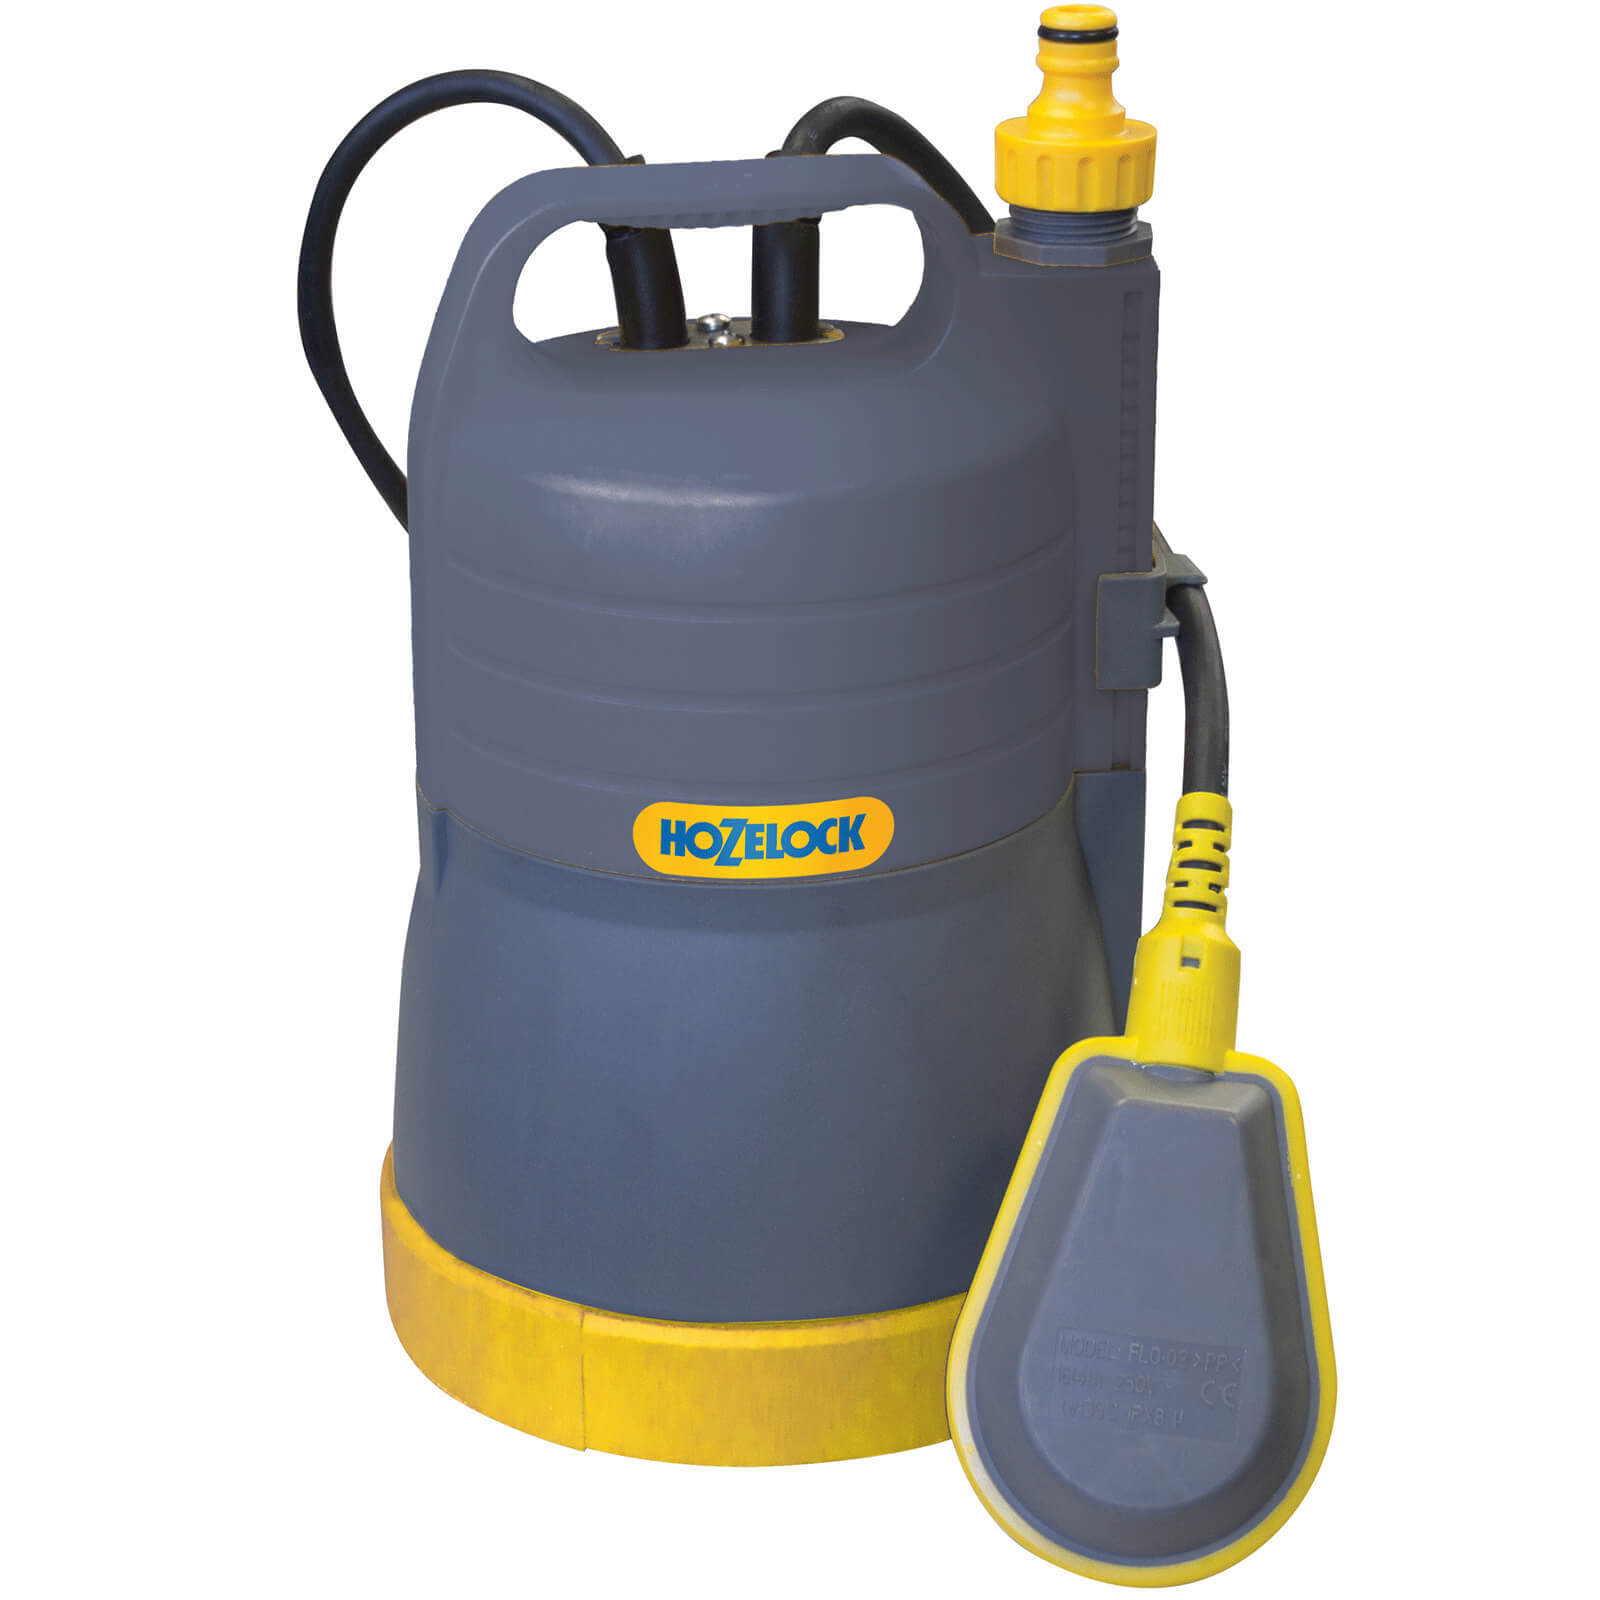 Image of Hozelock FLOWMAX COLLECT 2200 Submersible Water Butt Pump 240v